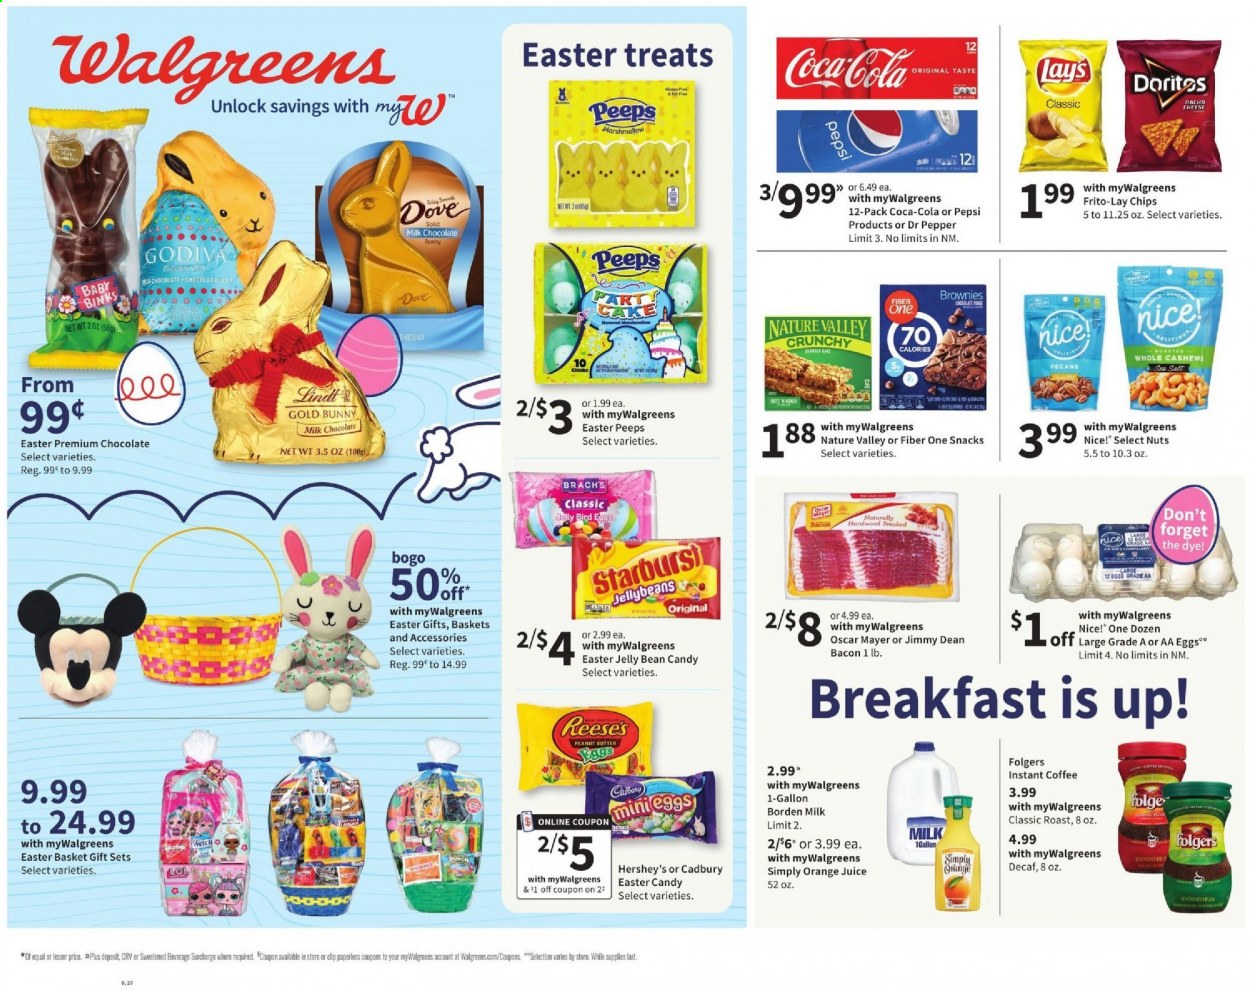 thumbnail - Walgreens Flyer - 03/28/2021 - 04/03/2021 - Sales products - Jimmy Dean, bacon, Oscar Mayer, cheese, Reese's, Hershey's, marshmallows, milk chocolate, chocolate, Lindt, Godiva, Cadbury, chocolate bunny, Starburst, Peeps, chips, snack, Lay’s, Frito-Lay, Nice!, jelly, Nature Valley, Fiber One, peanut butter, cashews, pecans, Coca-Cola, Pepsi, orange juice, juice, Dr. Pepper, instant coffee, Folgers, Dove. Page 1.